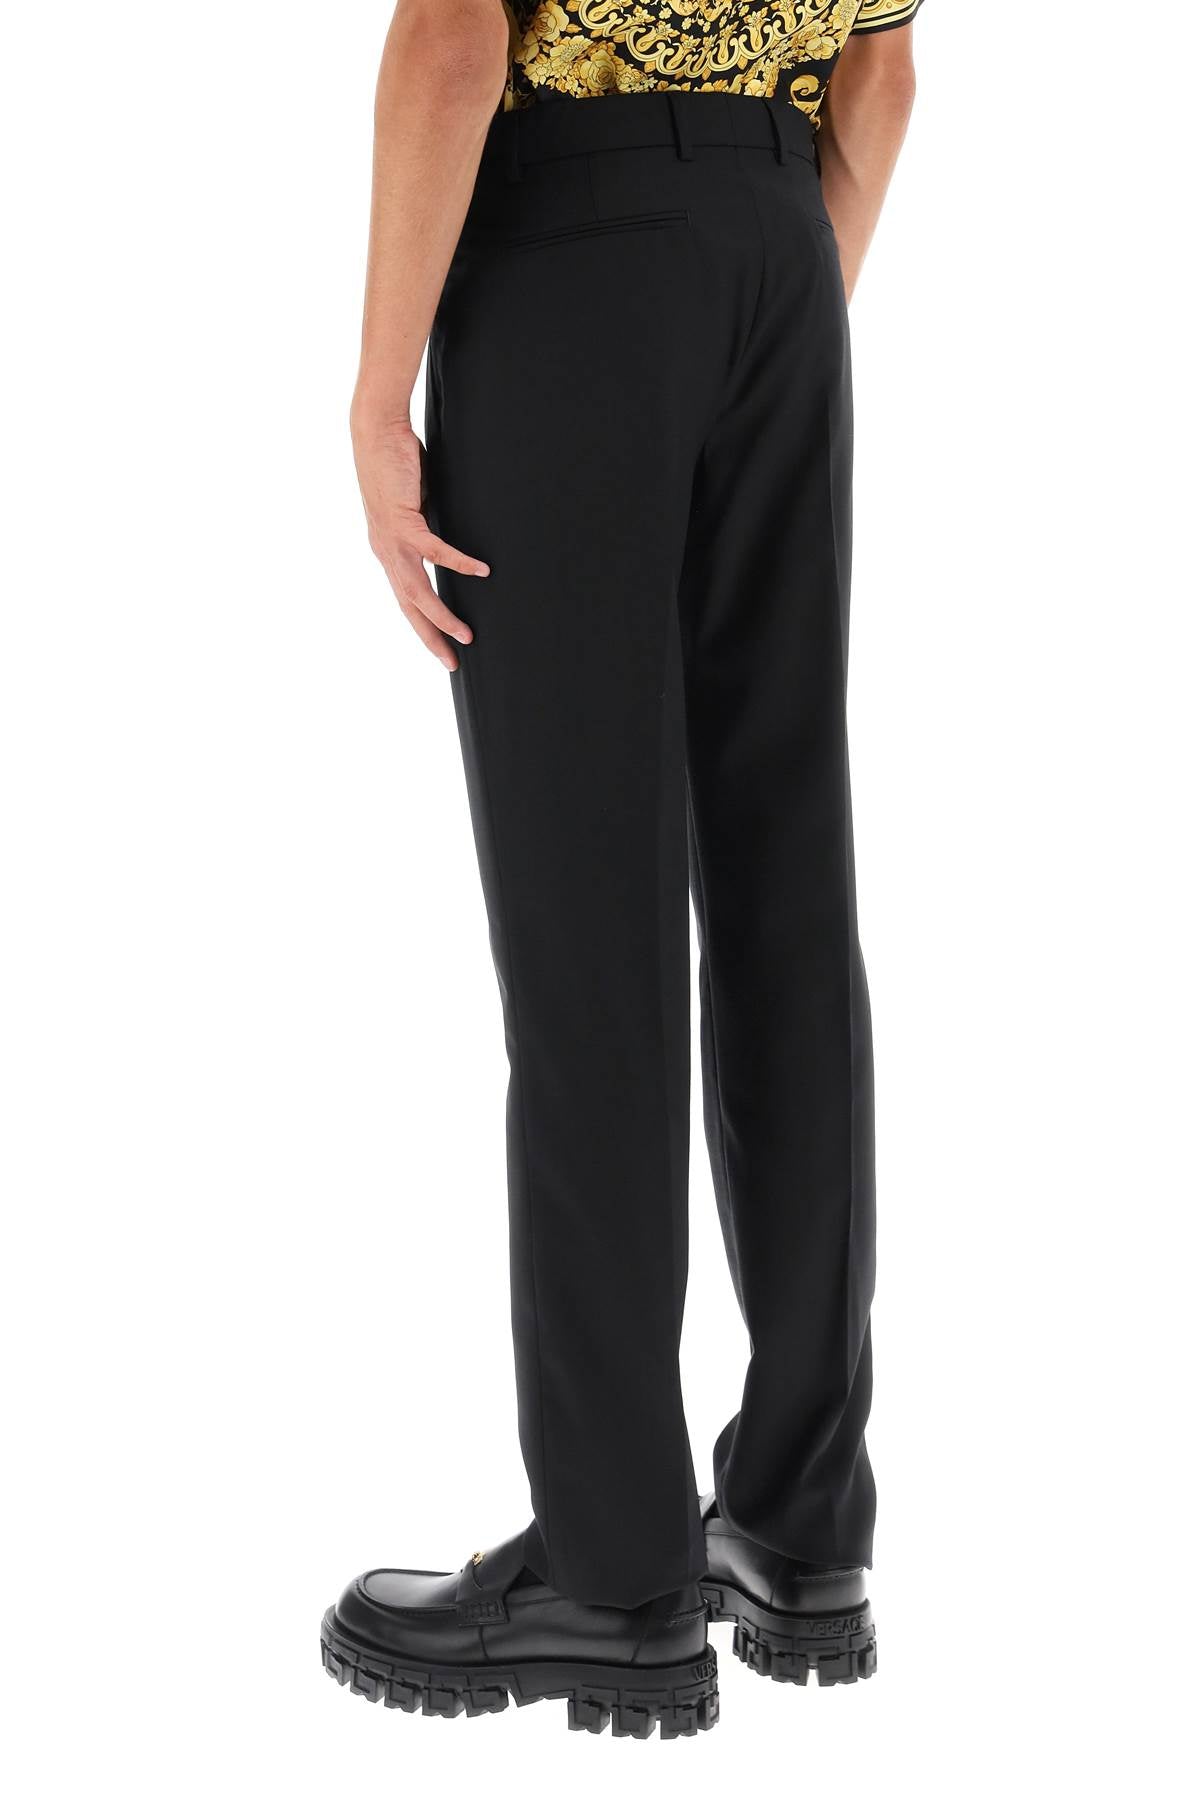 Versace tailored pants with medusa details-2